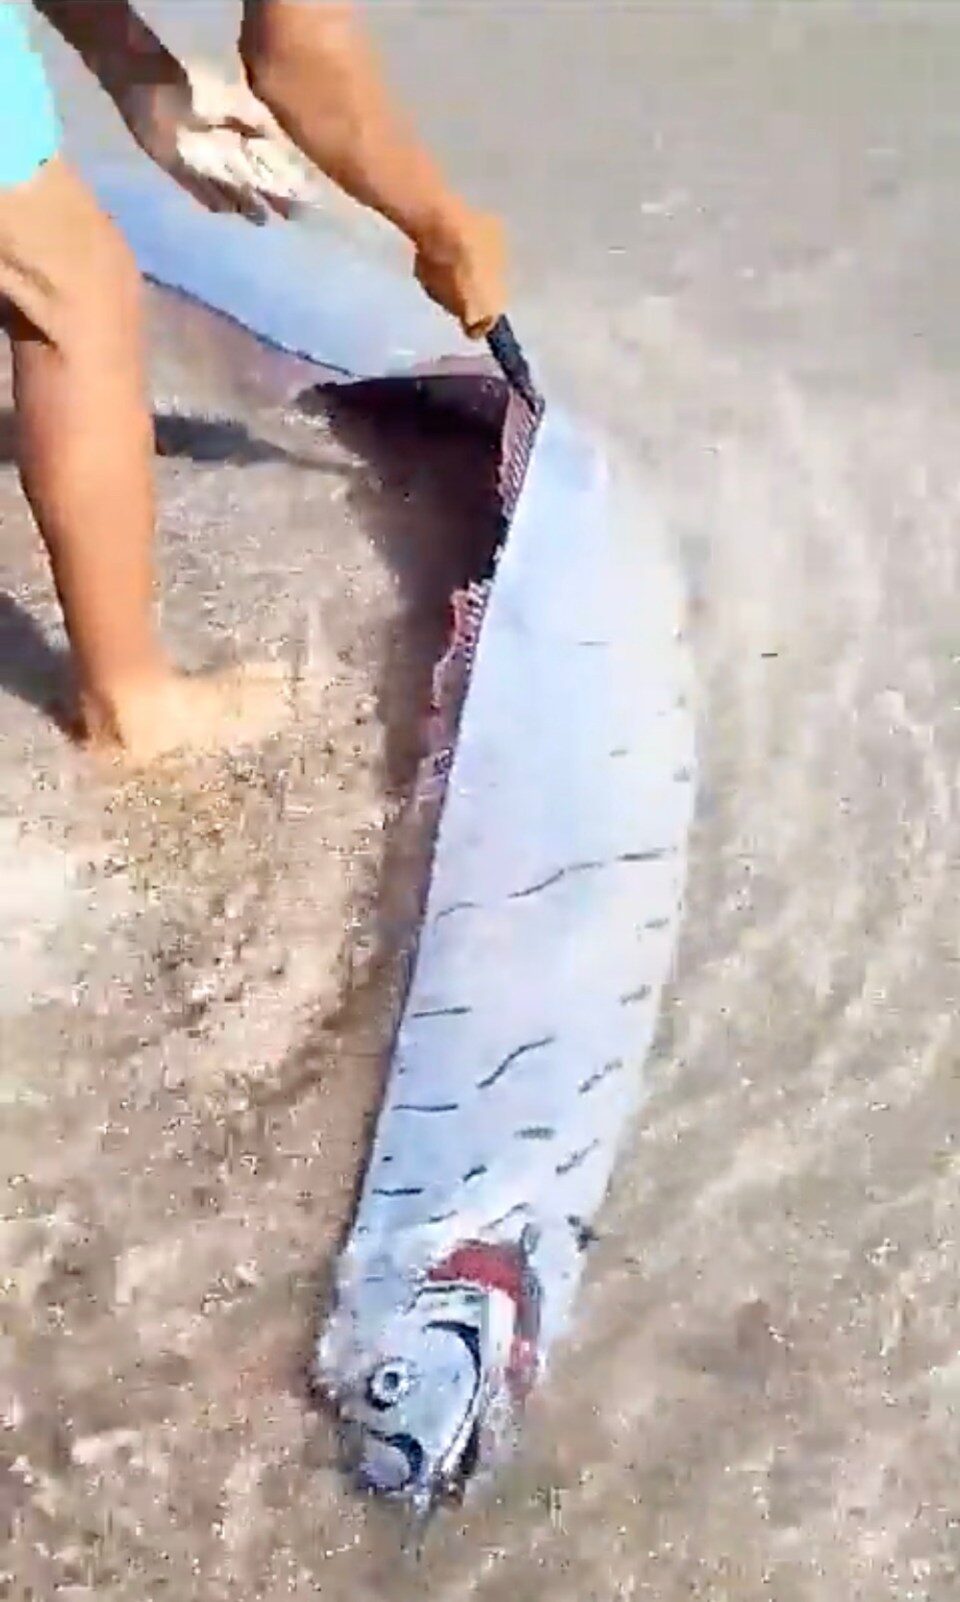 An oarfish was spotted on the shoreline of Los Coquitos beach in Dominican Republic